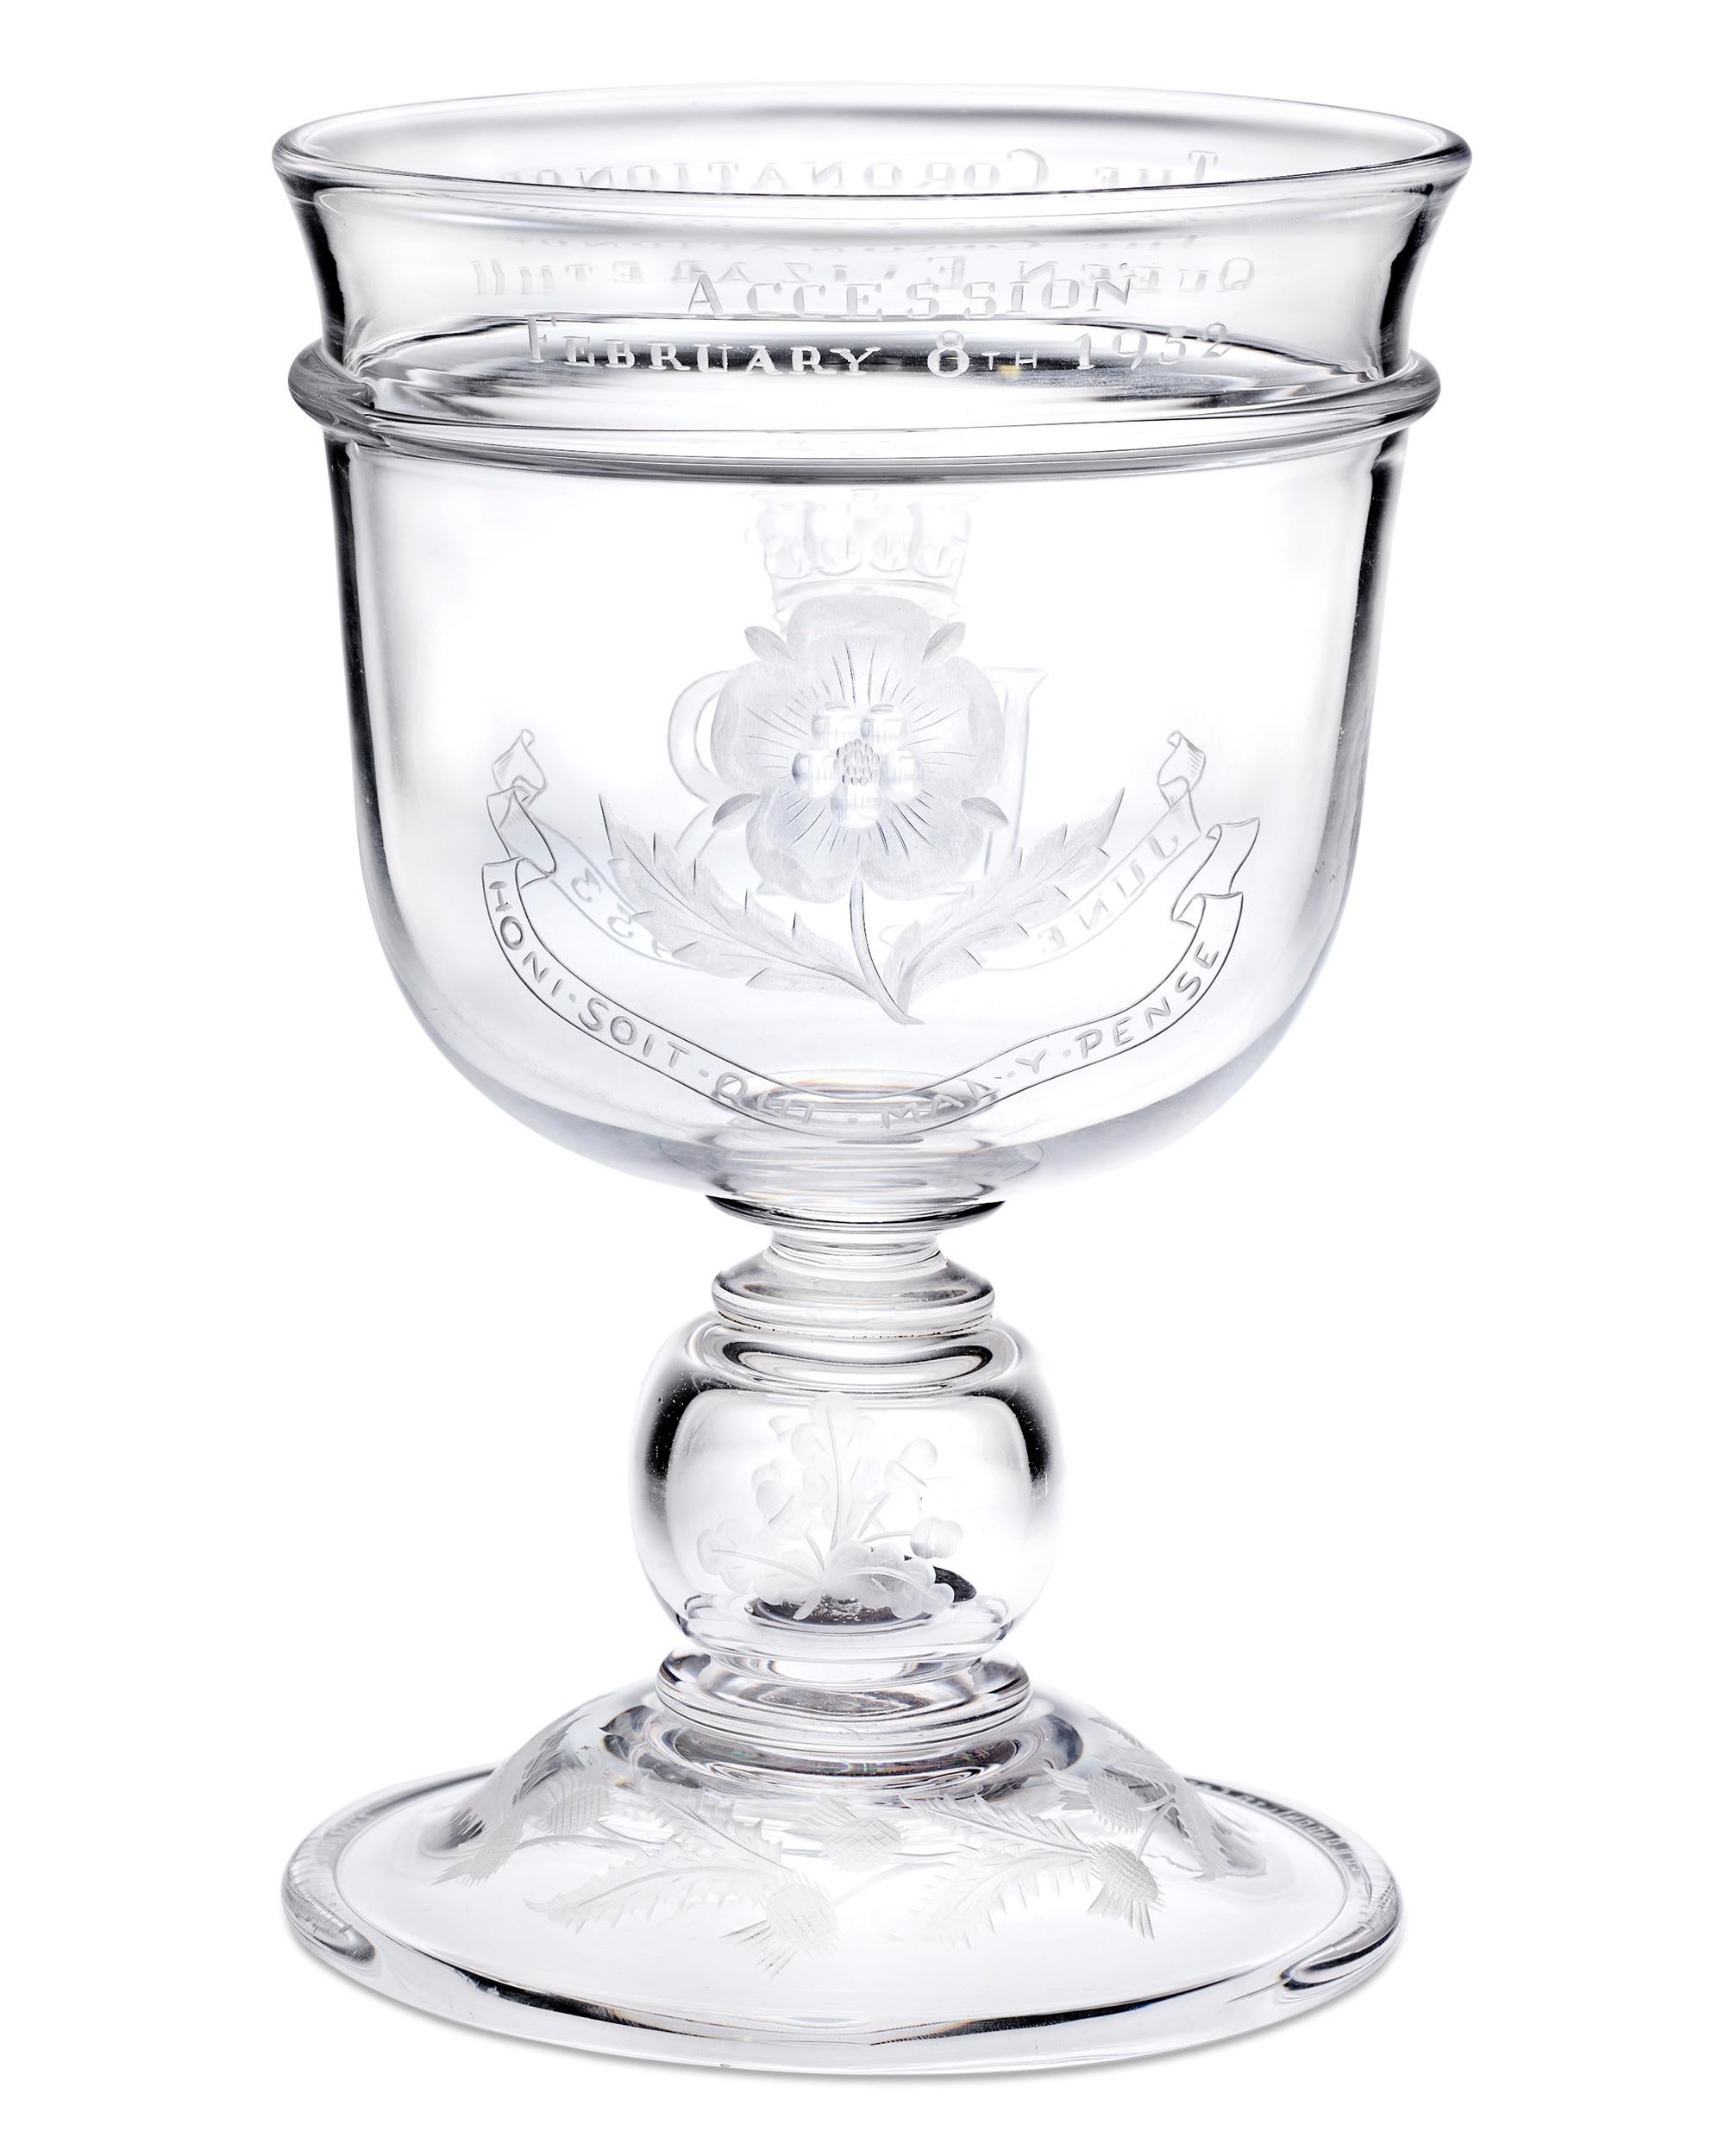 This impressive engraved goblet was created to celebrate Queen Elizabeth II's accession to the throne of England and coronation. Crafted by Thomas Goode & Co. around the coronation on June 2nd 1953, this vessel would have been a treasured souvenir